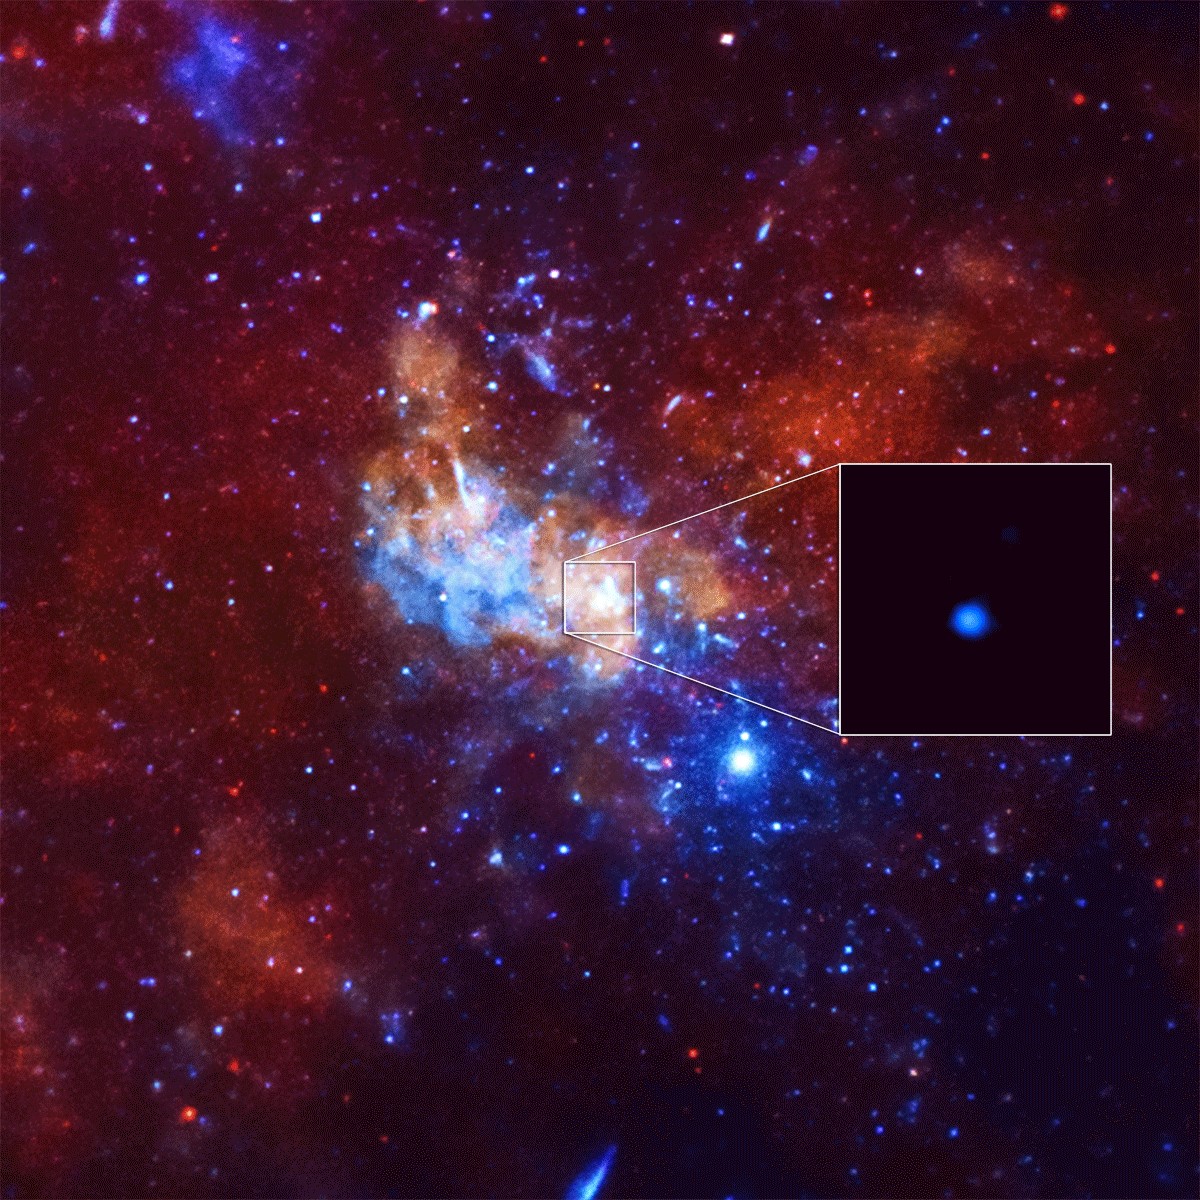 Supermassive black hole at the center of the Milky Way galaxy